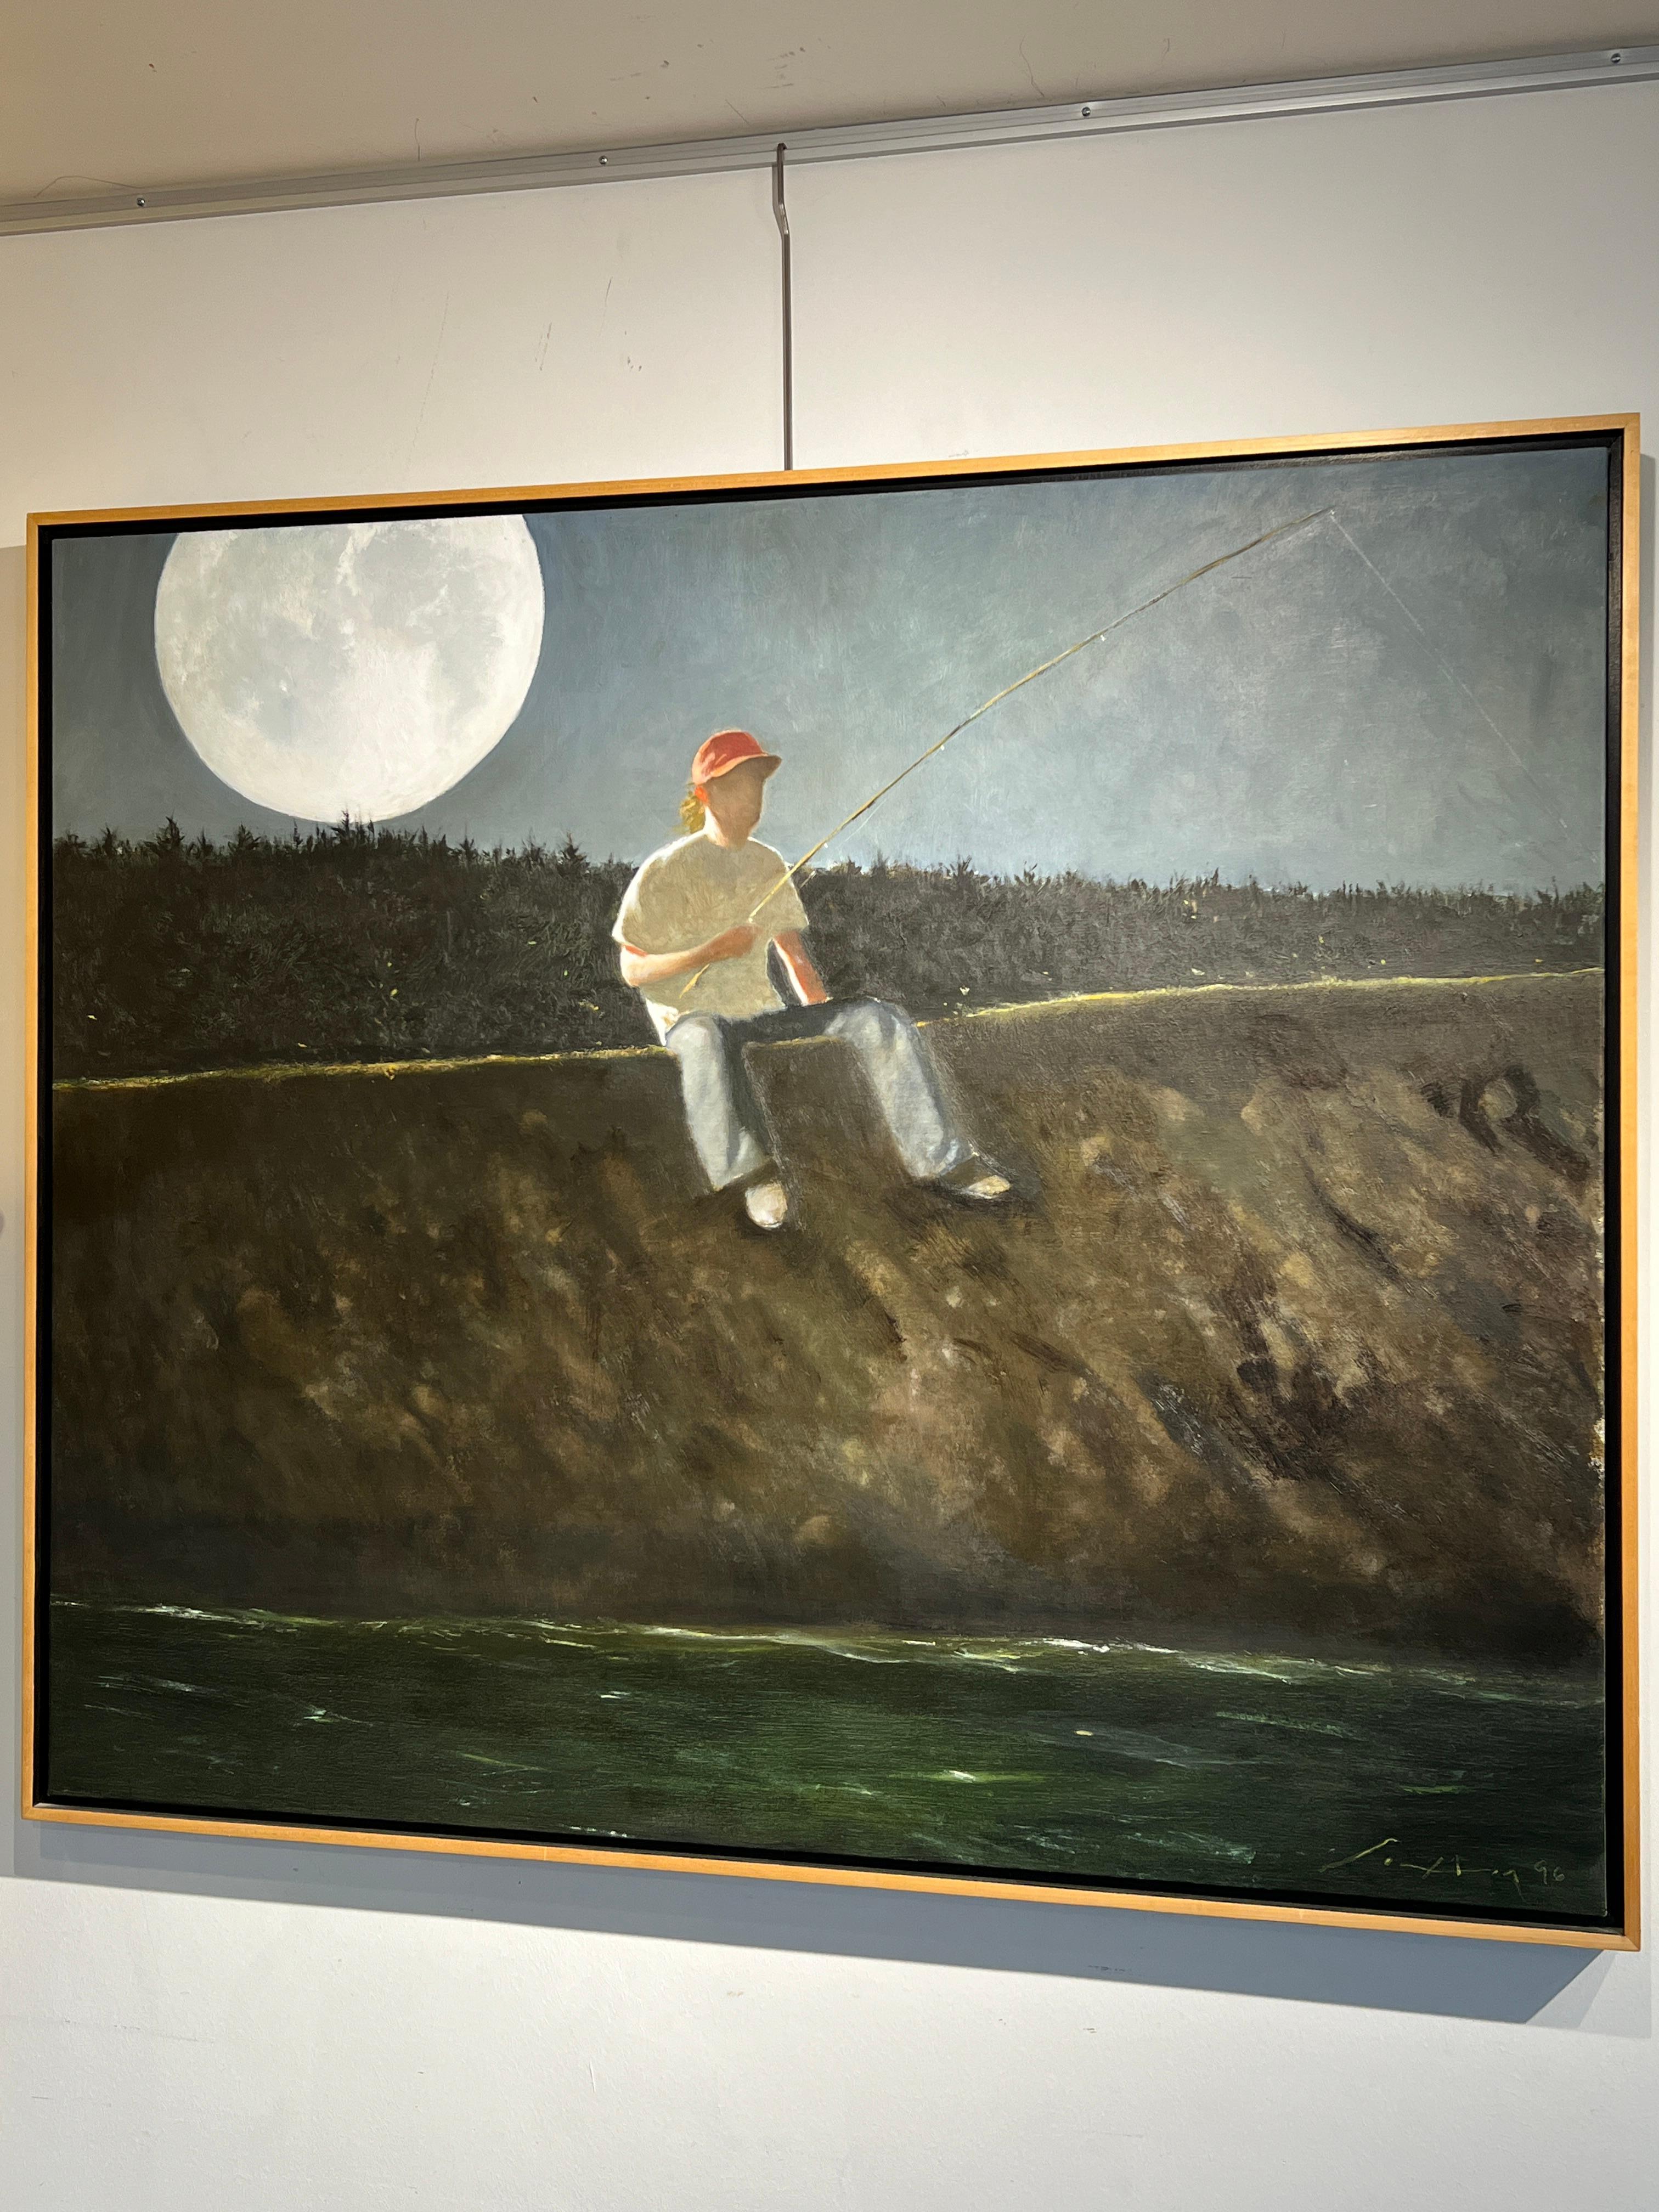 Mad River, 1996
Julio Larraz (Cuban, 1944)
Signed and Dated Lower Right
41 x 49 inches
43 x 51 inches with frame
Provenance: Atrium Gallery, 1999

Accomplished painter, sculptor, and draftsman Julio Larraz through his artwork has transcended time